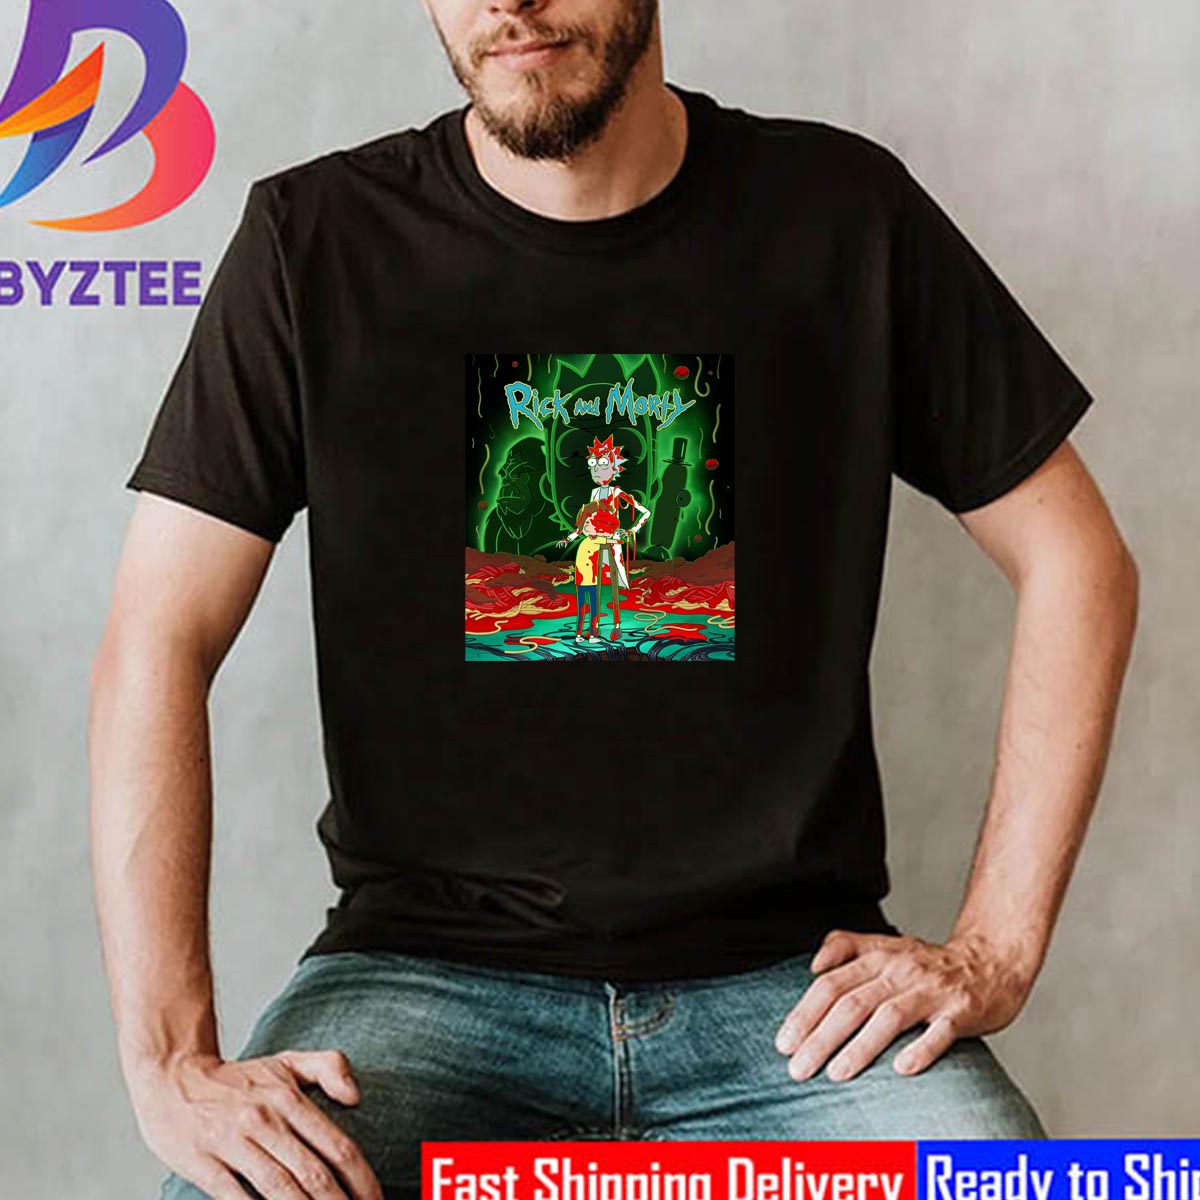 Rick and Morty Season 7 Official Poster Classic T-Shirt - Byztee